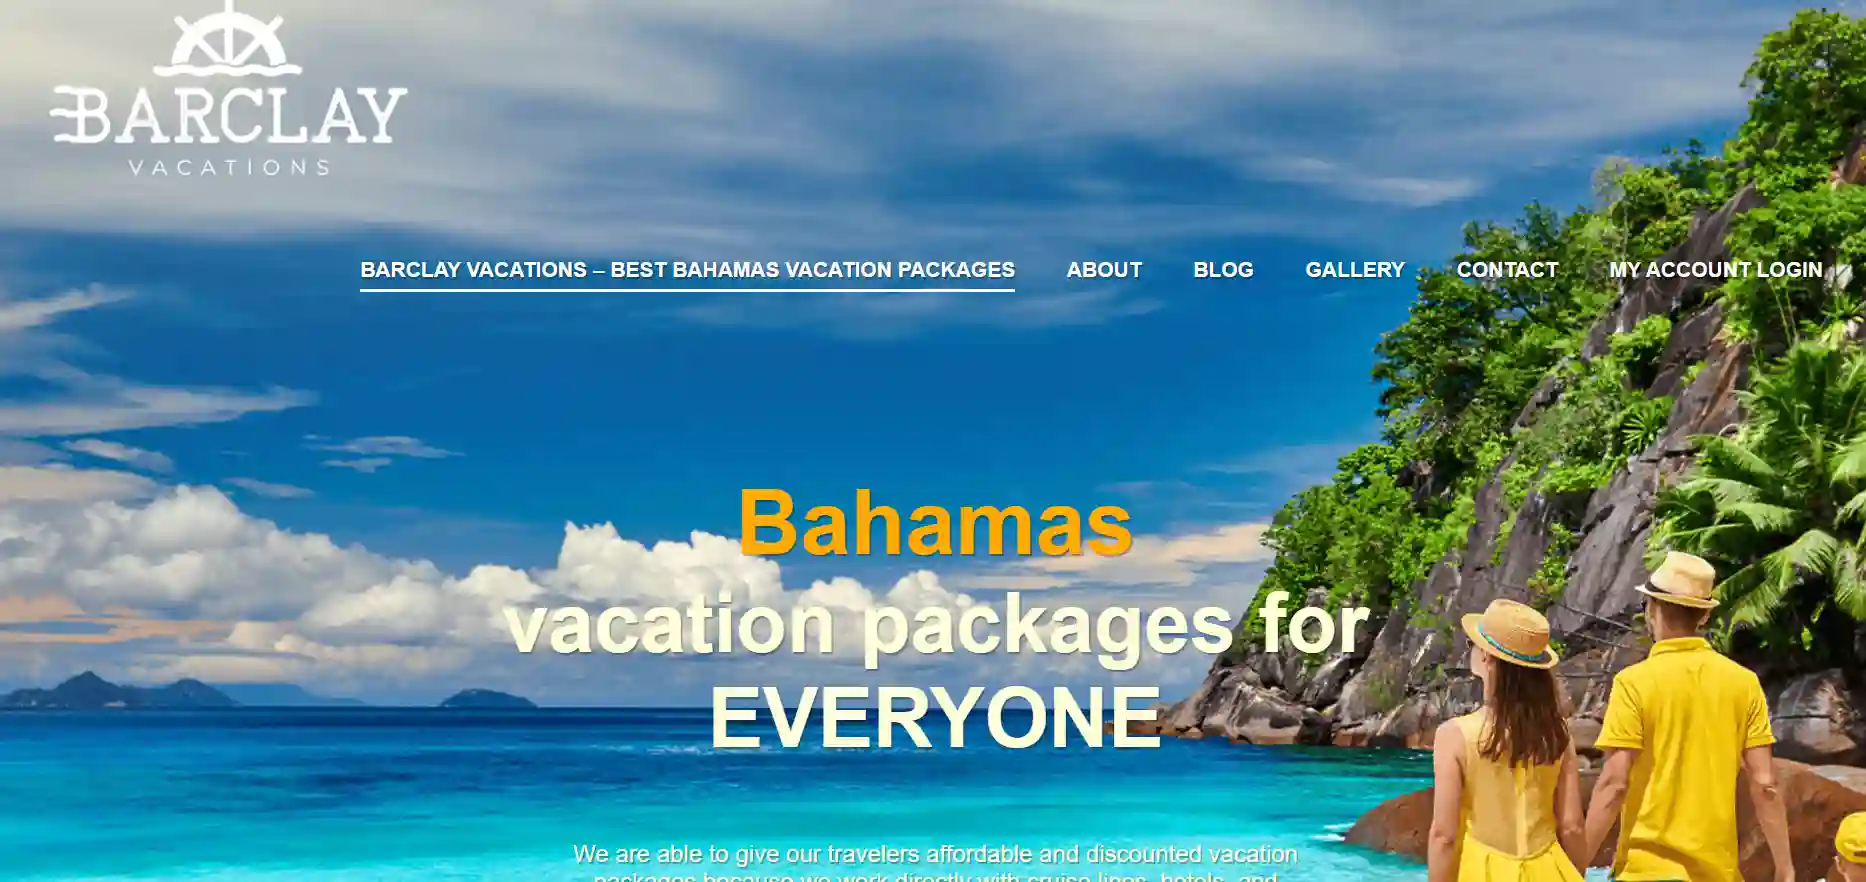 You are currently viewing Barclay Vacations Legit or a Scam? Don’t Fall Victim!